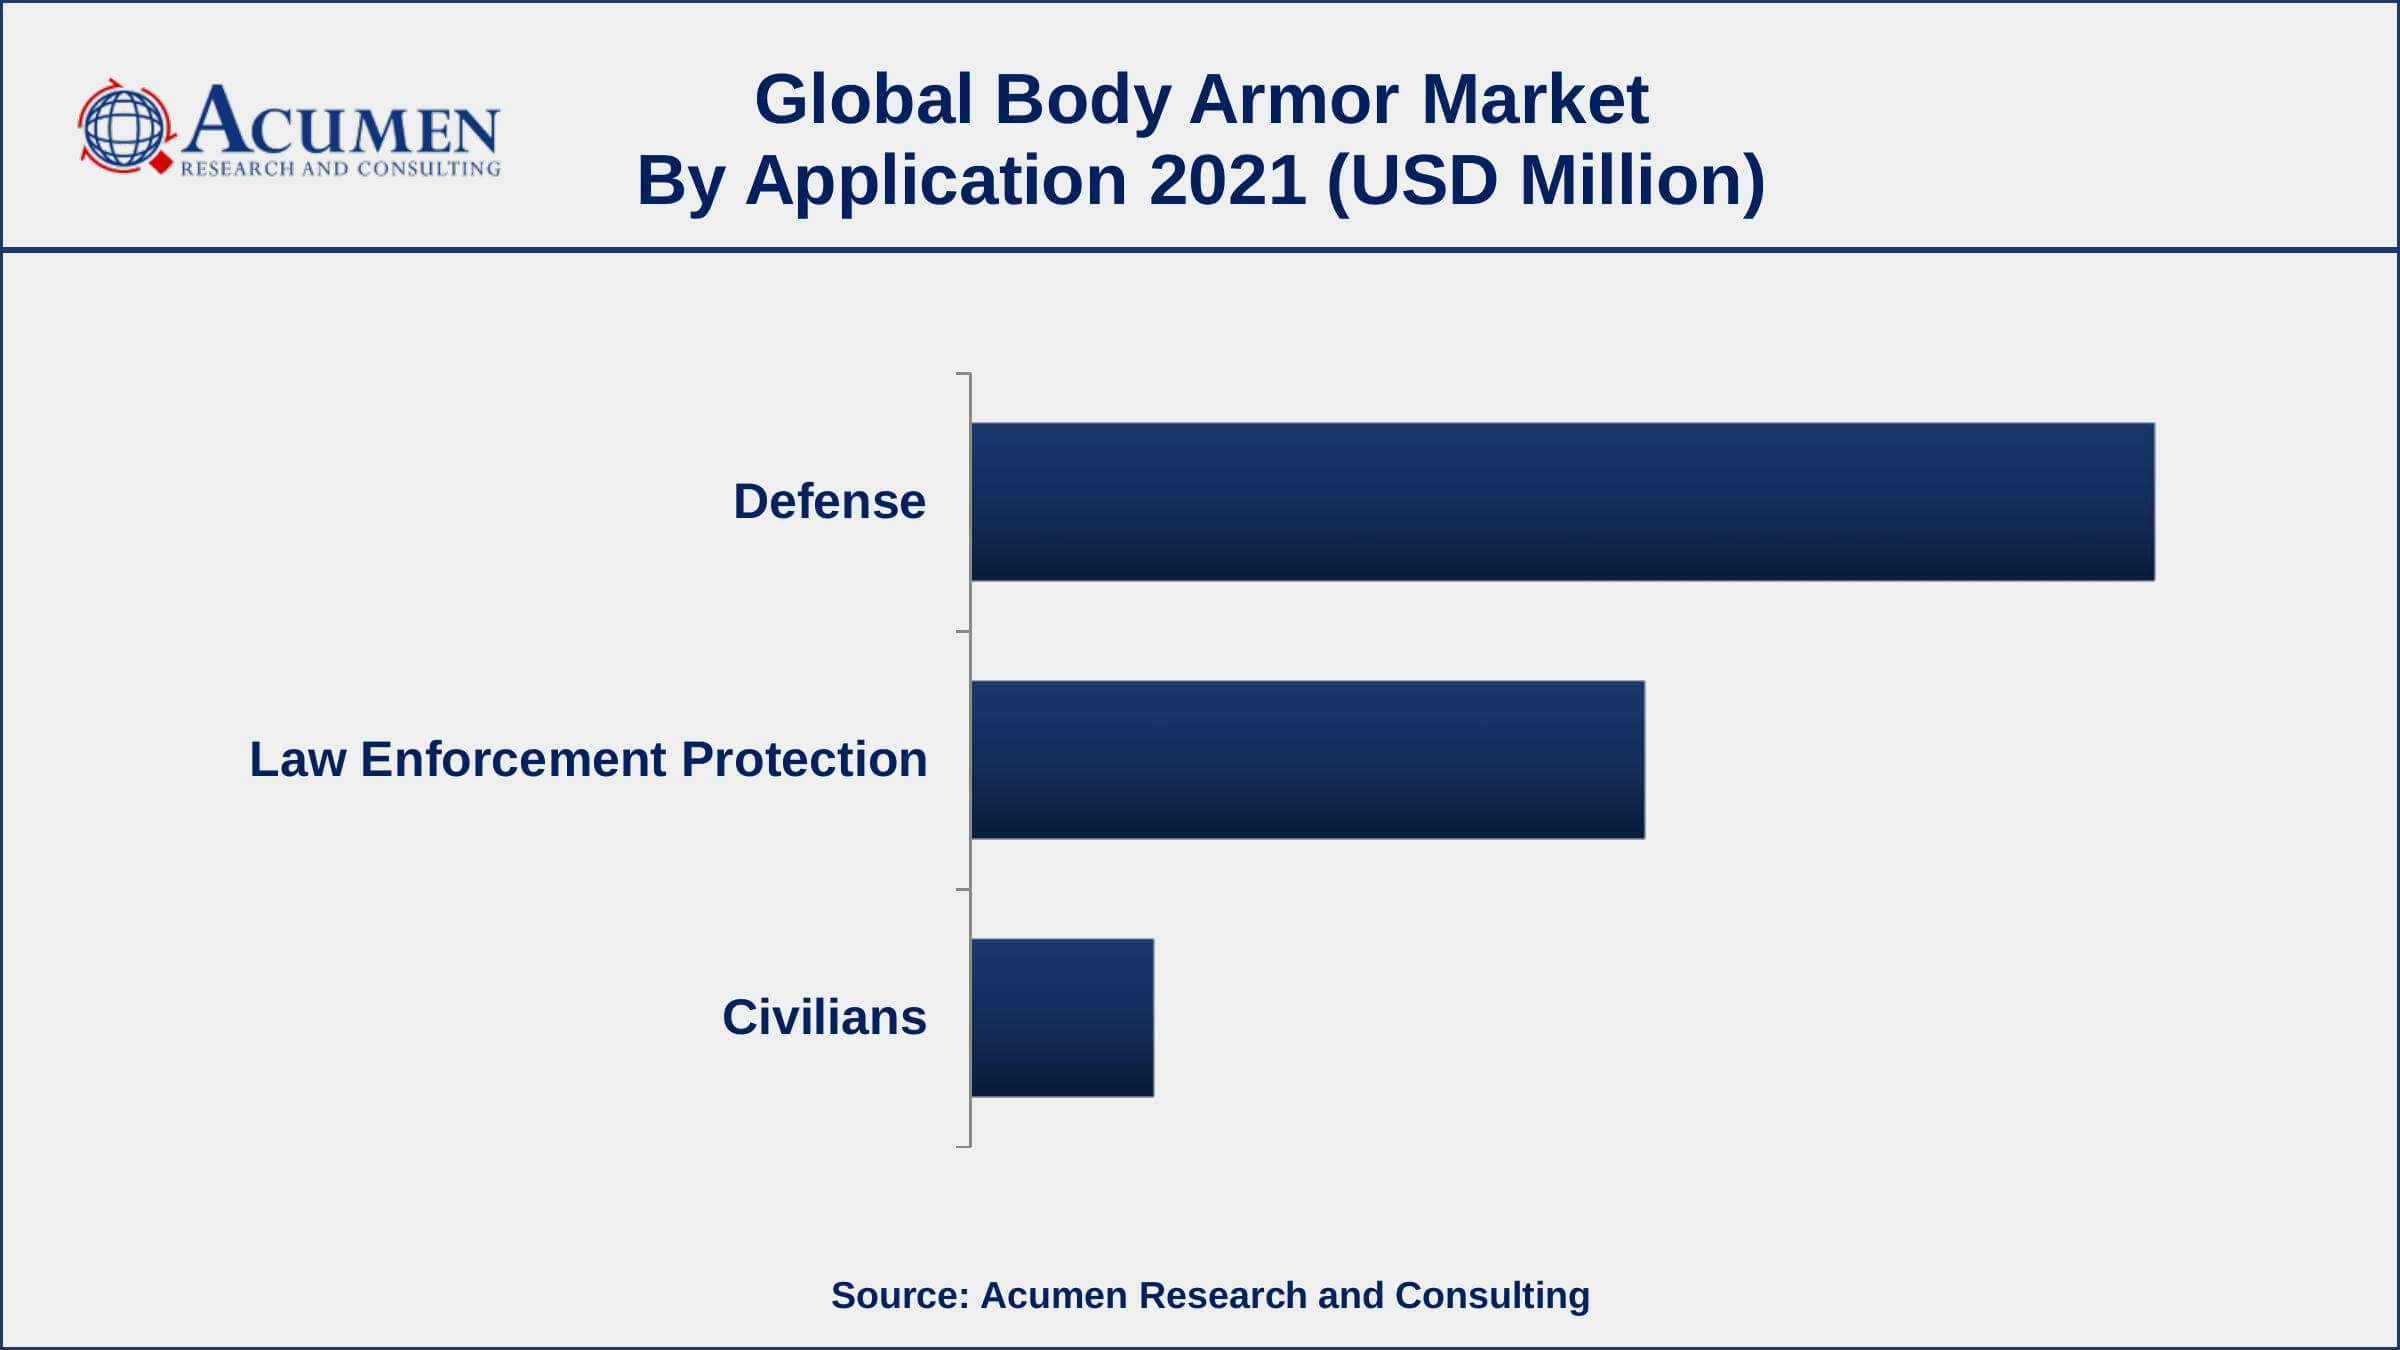 Among application, defence category engaged more than 58% of the total market share